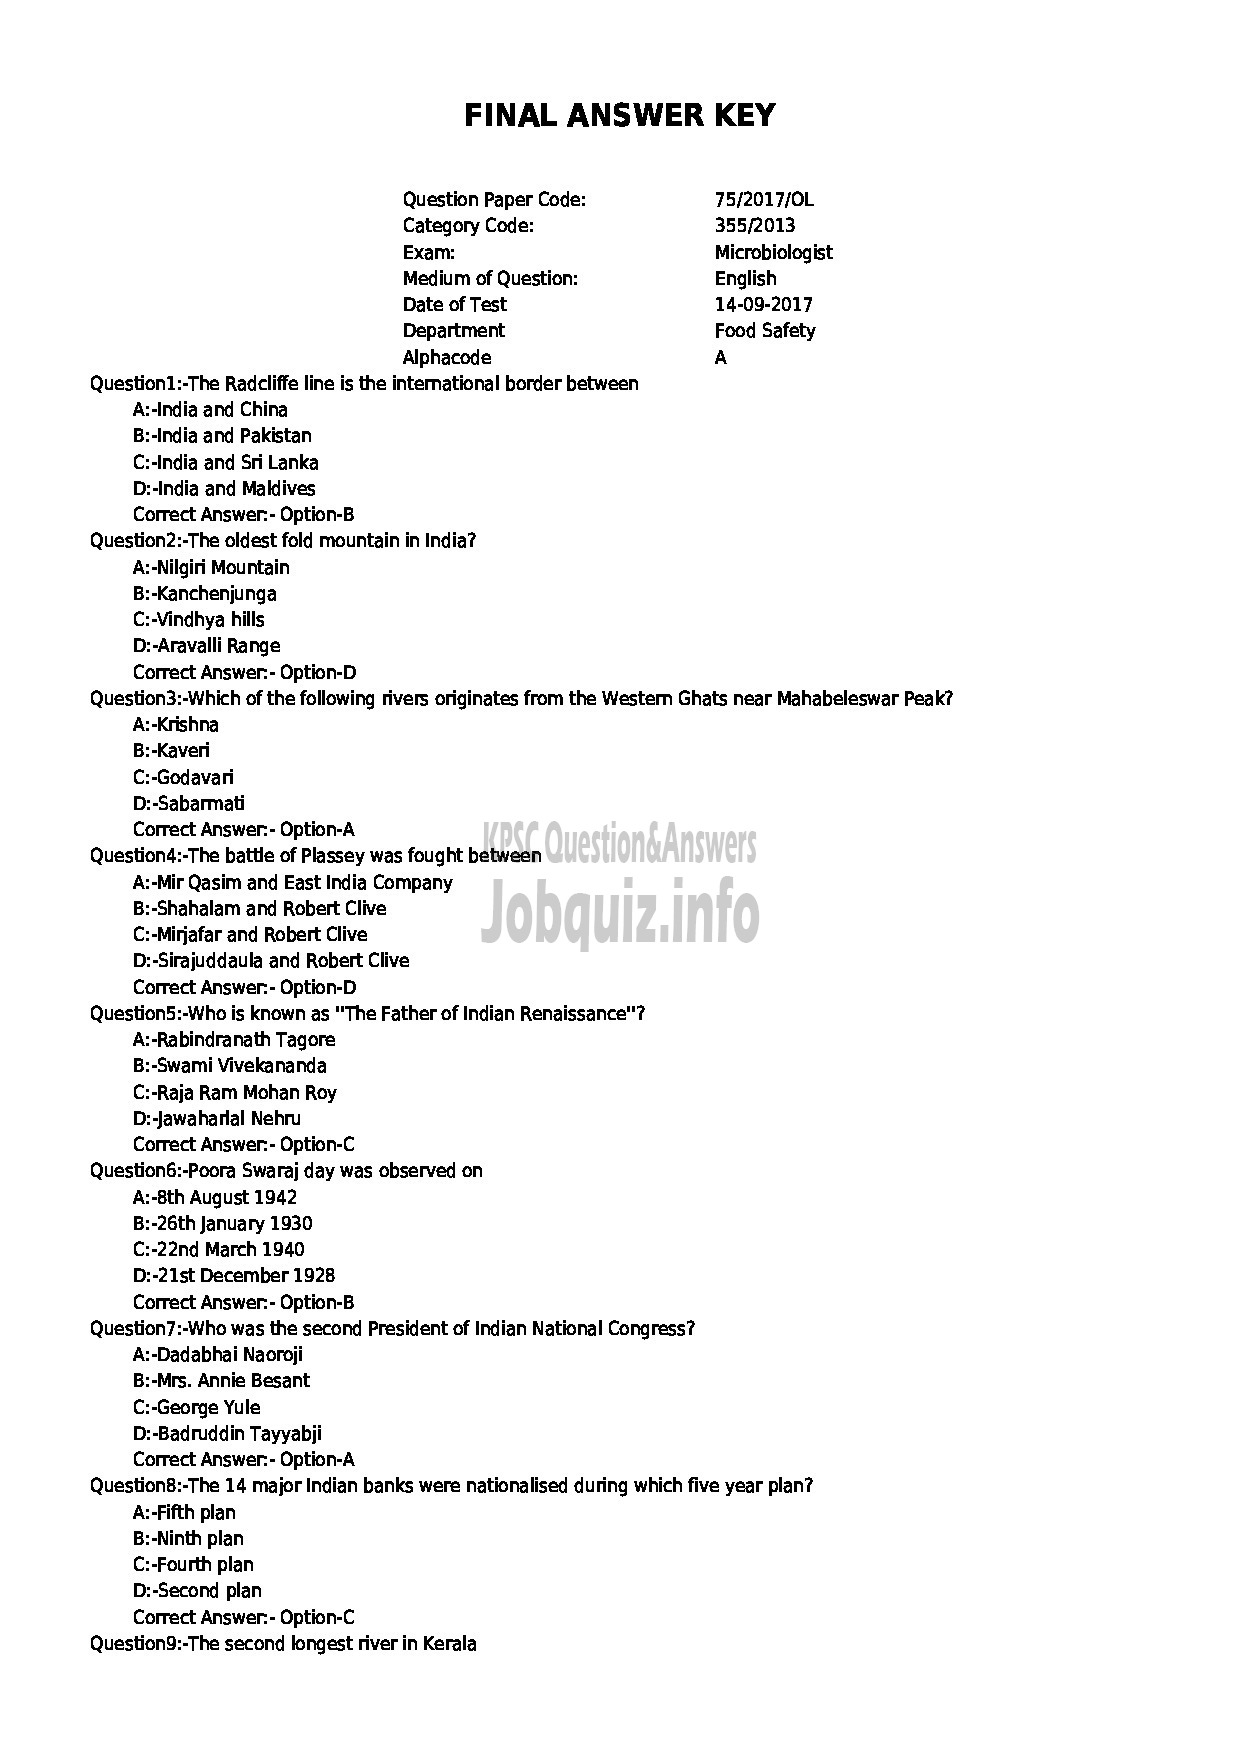 Kerala PSC Question Paper - MICROBIOLOGIST FOOD SAFETY DEPARTMENT-1